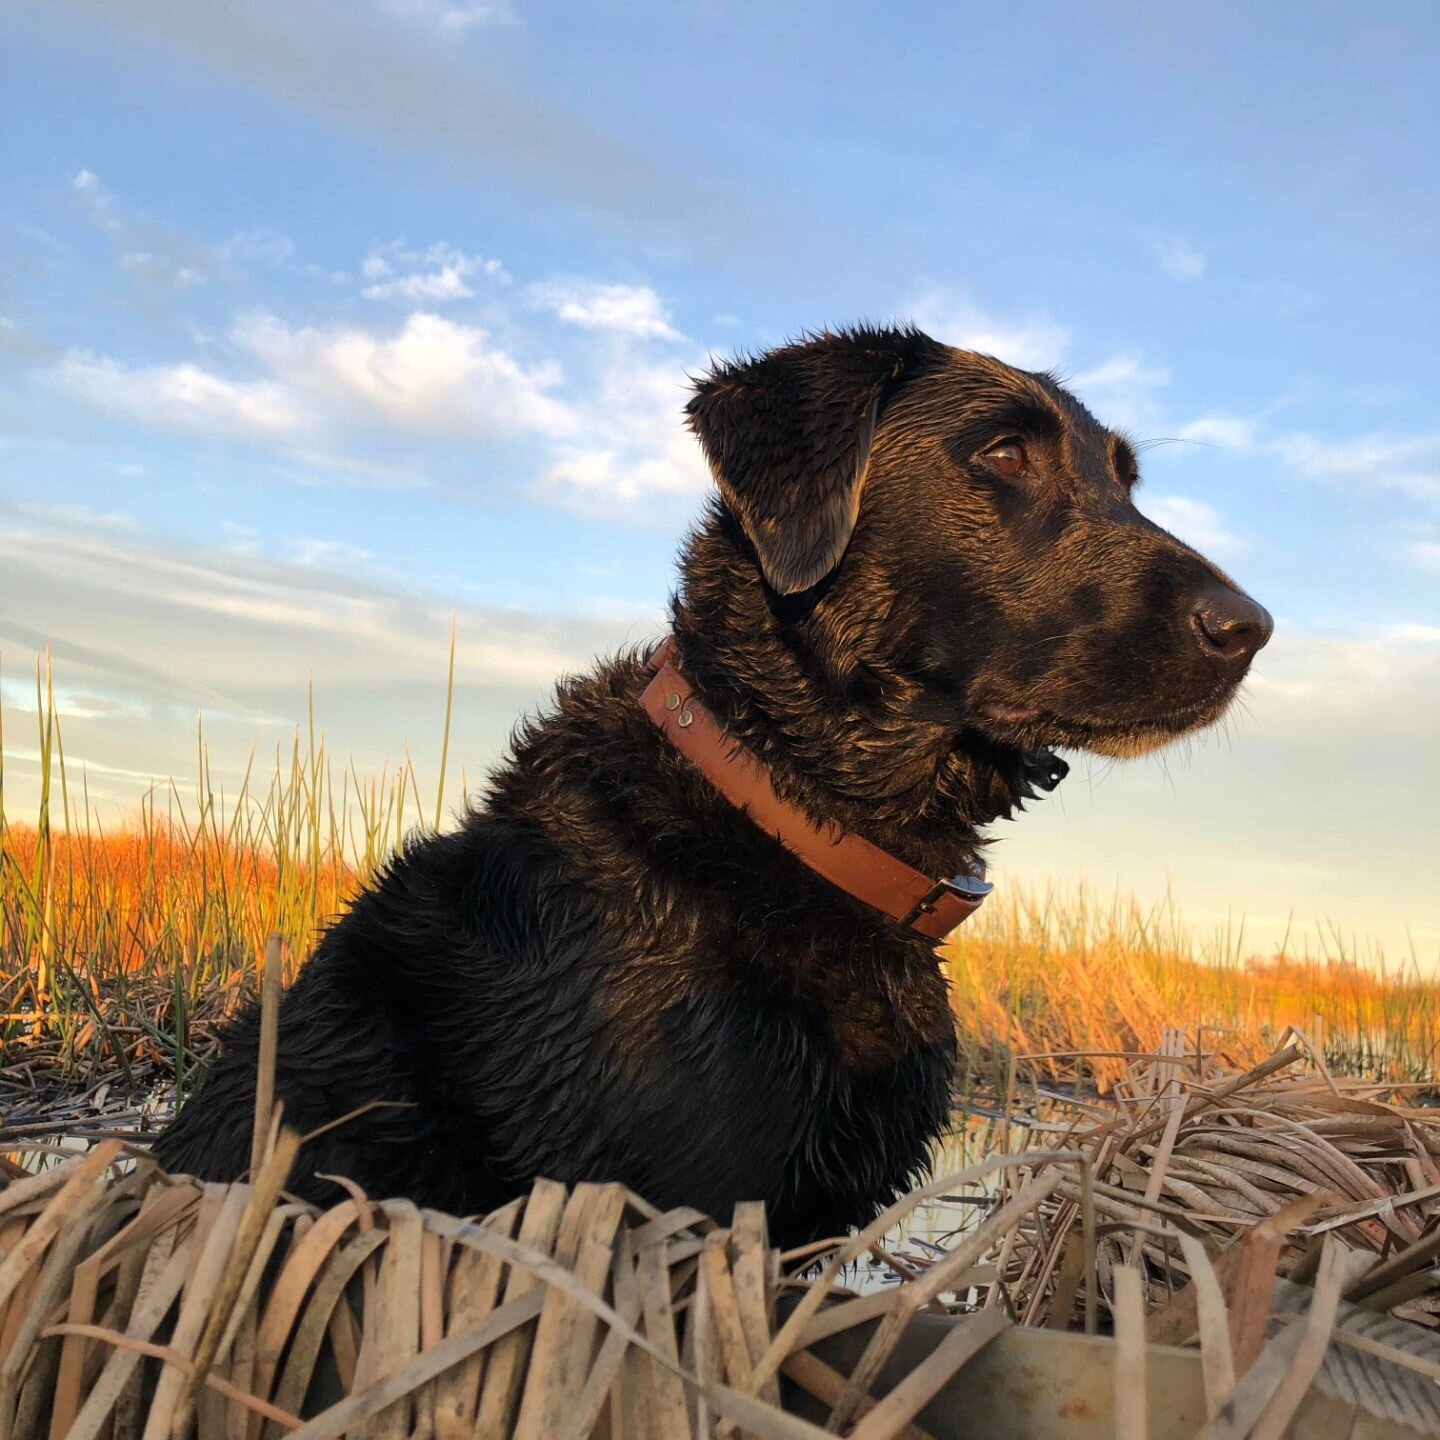 R.I.P. &quot;FUSE&quot;
Bayside's Short Circuit SH 
(Flint X Minnow)
Our heart-felt condolences go out to the Flowers' family in their loss of a wonderful family companion and duck hunting buddy.